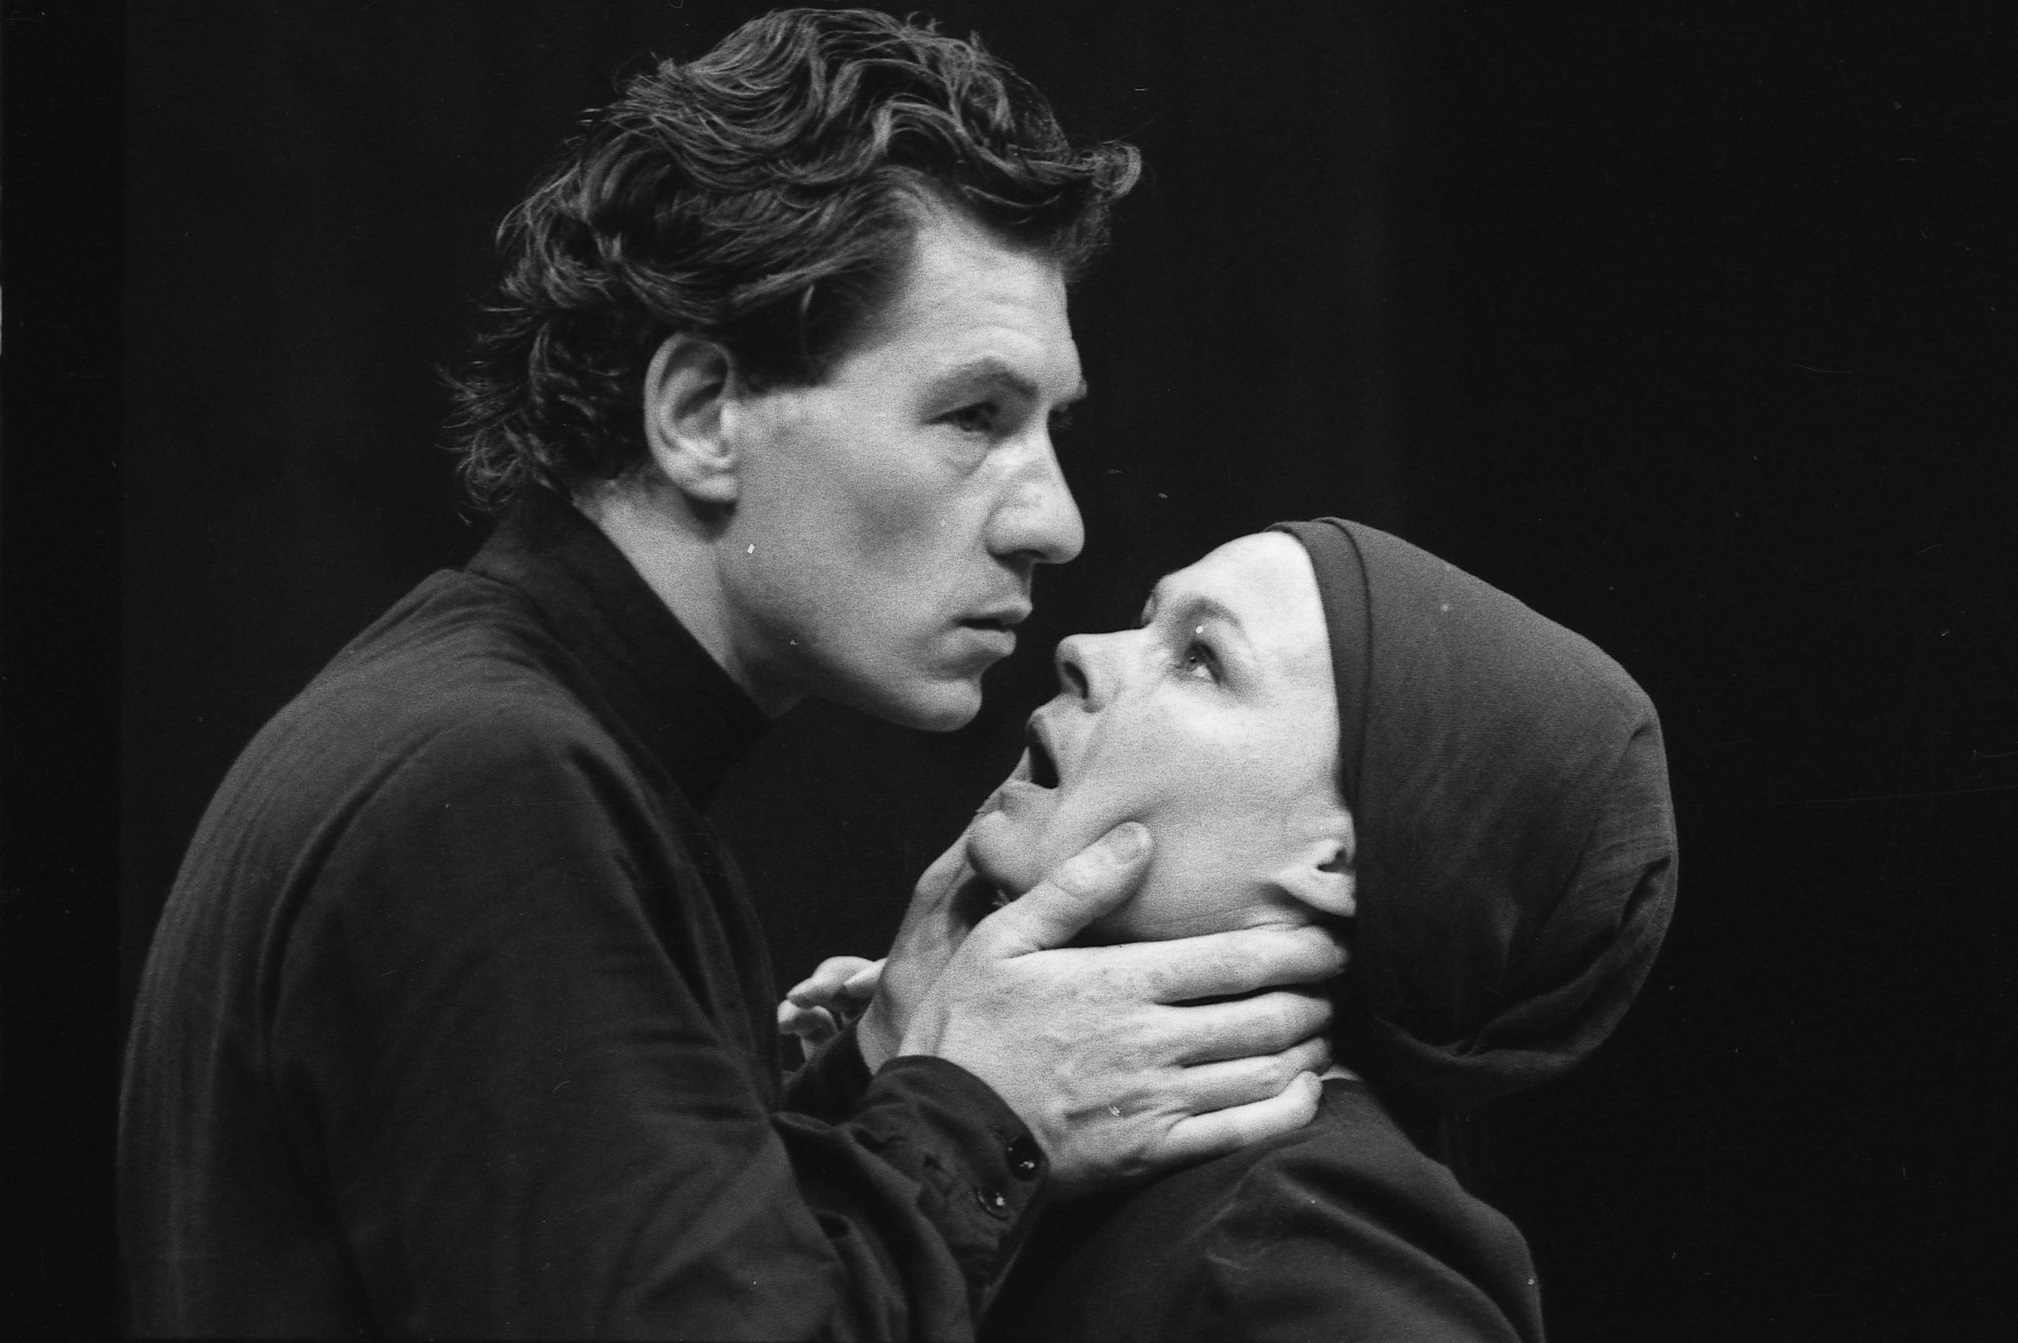 A black and white photograph of Ian Mckellen and Judi Dench performing onstage in Macbeth, in 1976